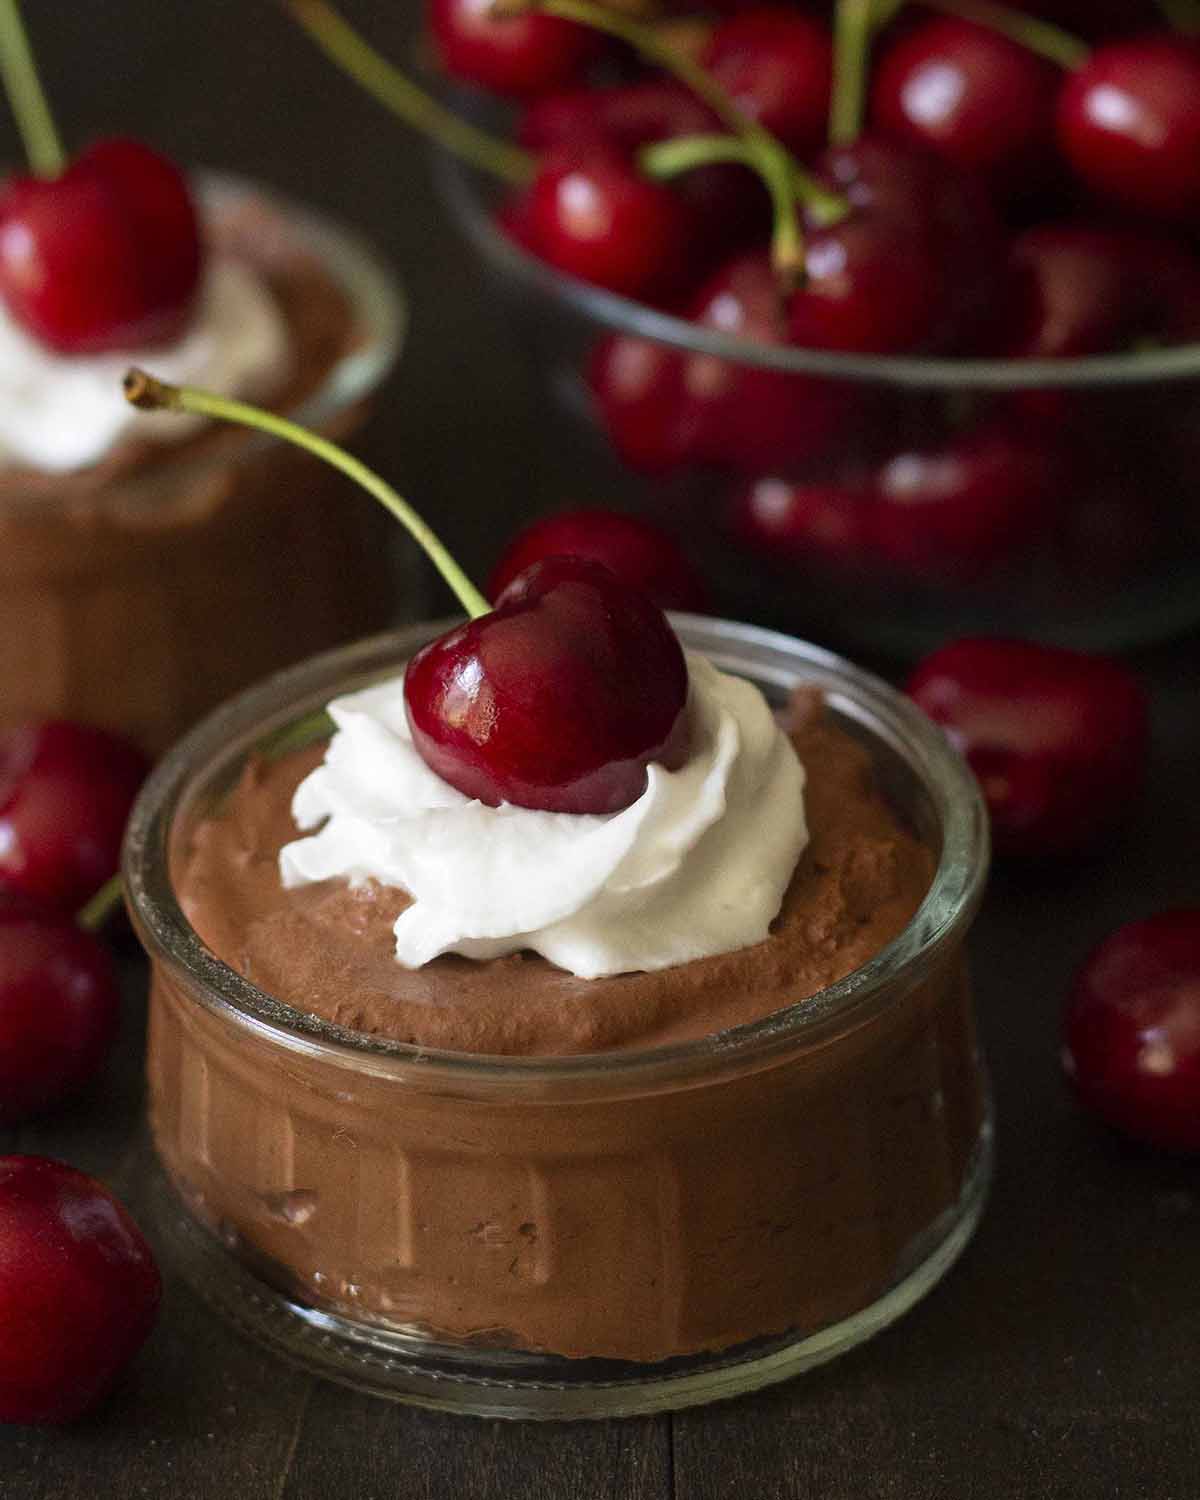 Chocolate mousse topped with a cherry.